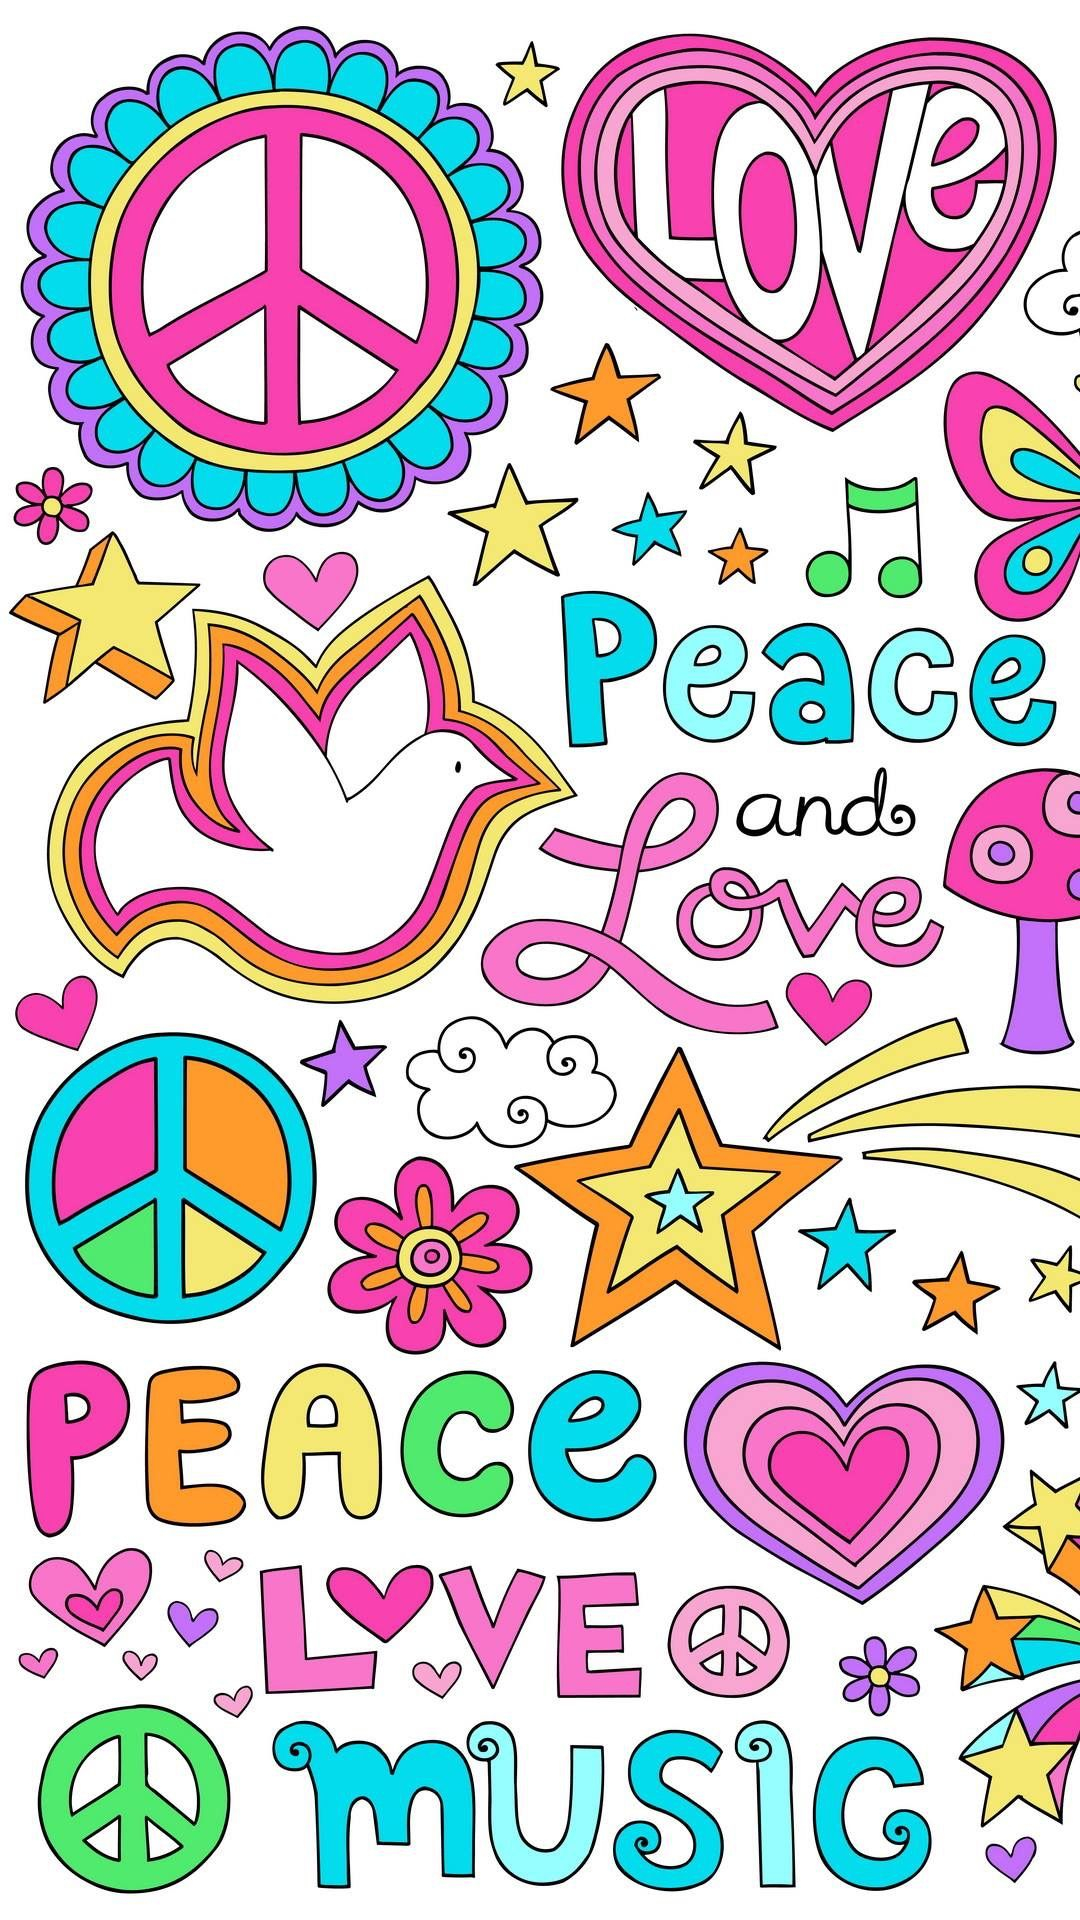 1080x1920 Pin by T. Benson on Words and Feelings | Peace and love, Hippie wallpaper, Peace